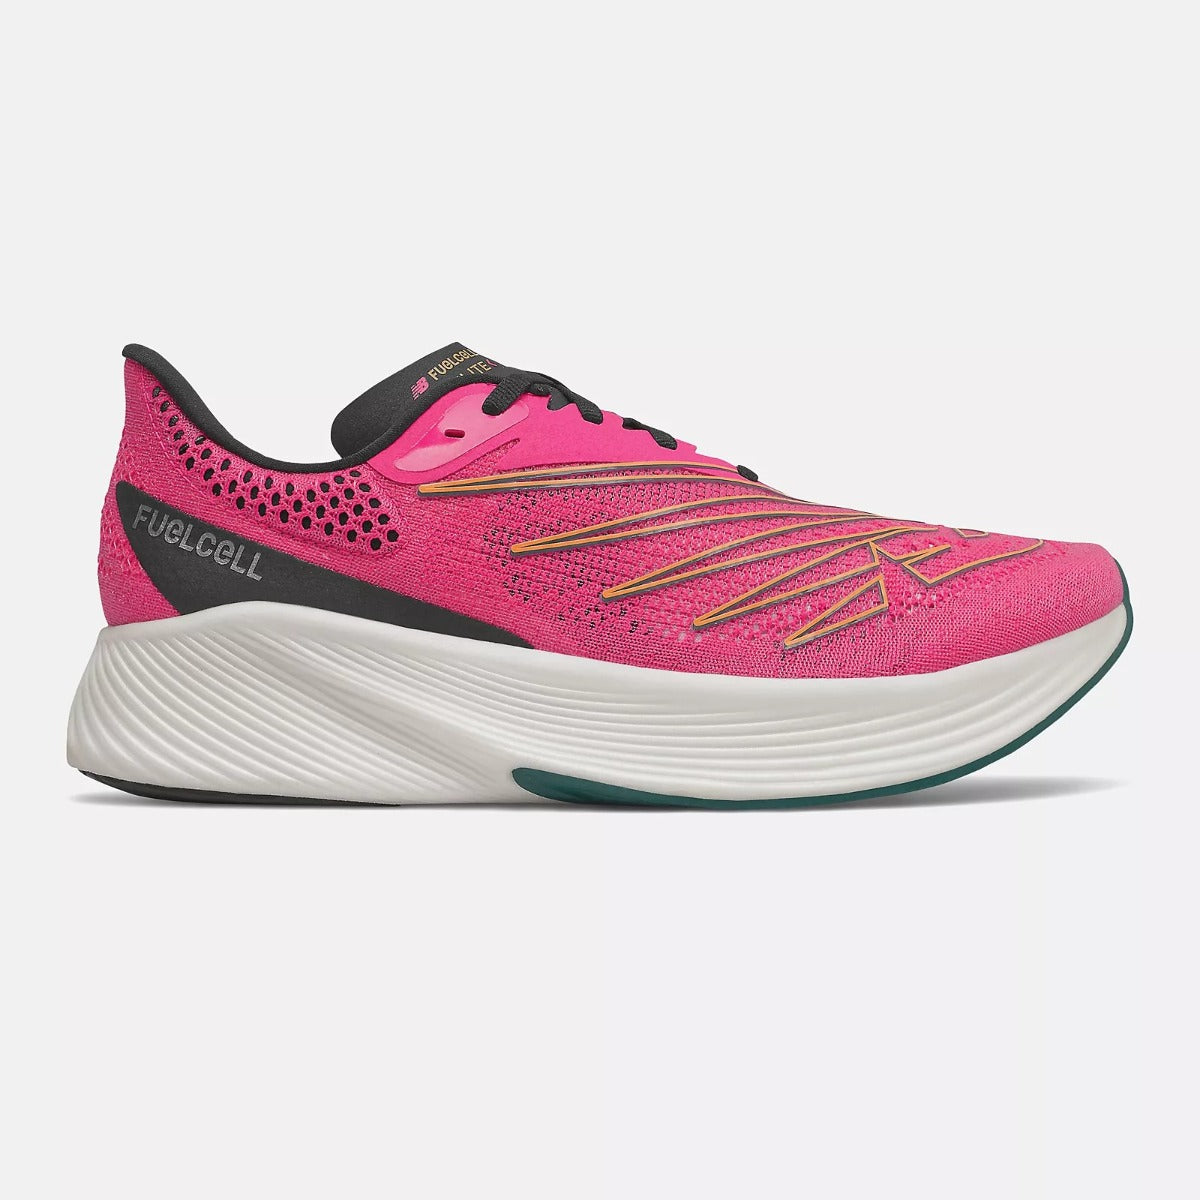 New Balance Fuelcell Rc Elite V2 Men's Running Shoes (Pink Glo)